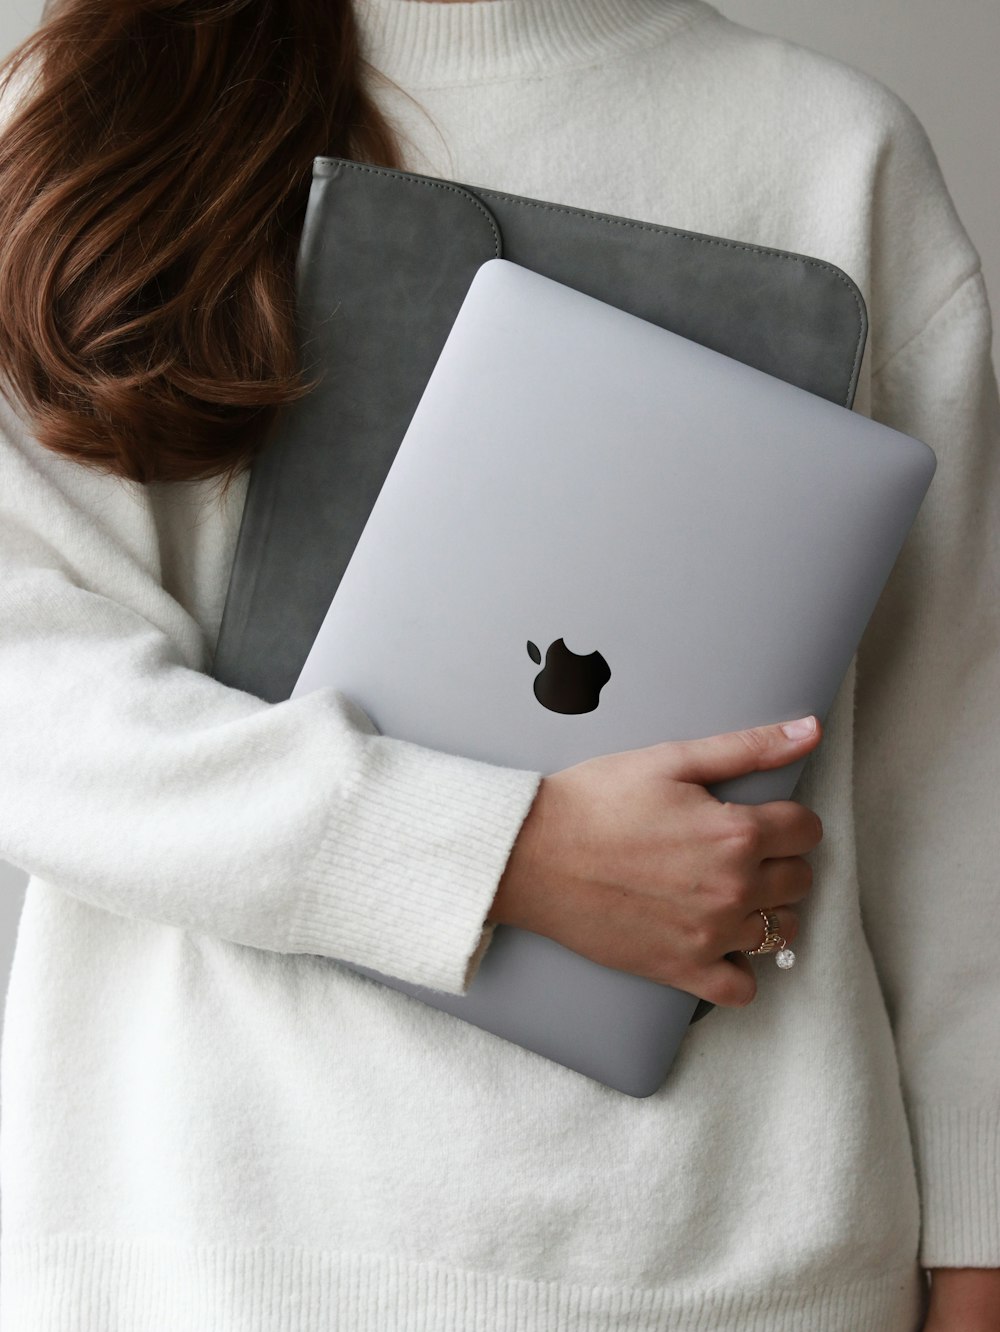 a woman holding a laptop computer in her hands